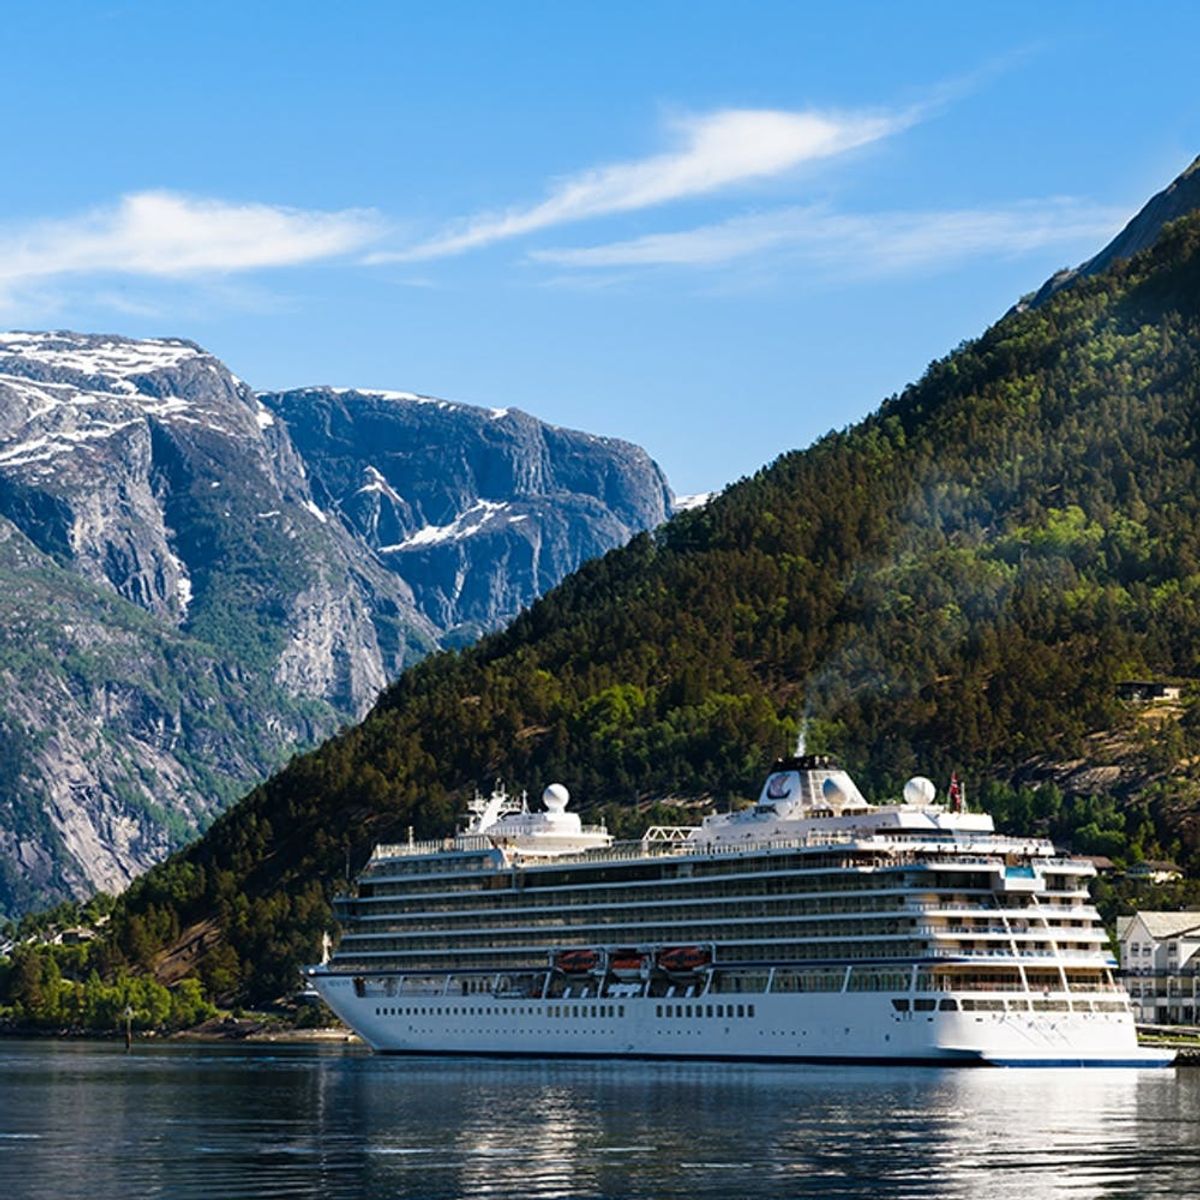 7 Reasons Cruises Aren’t Just for Retirees